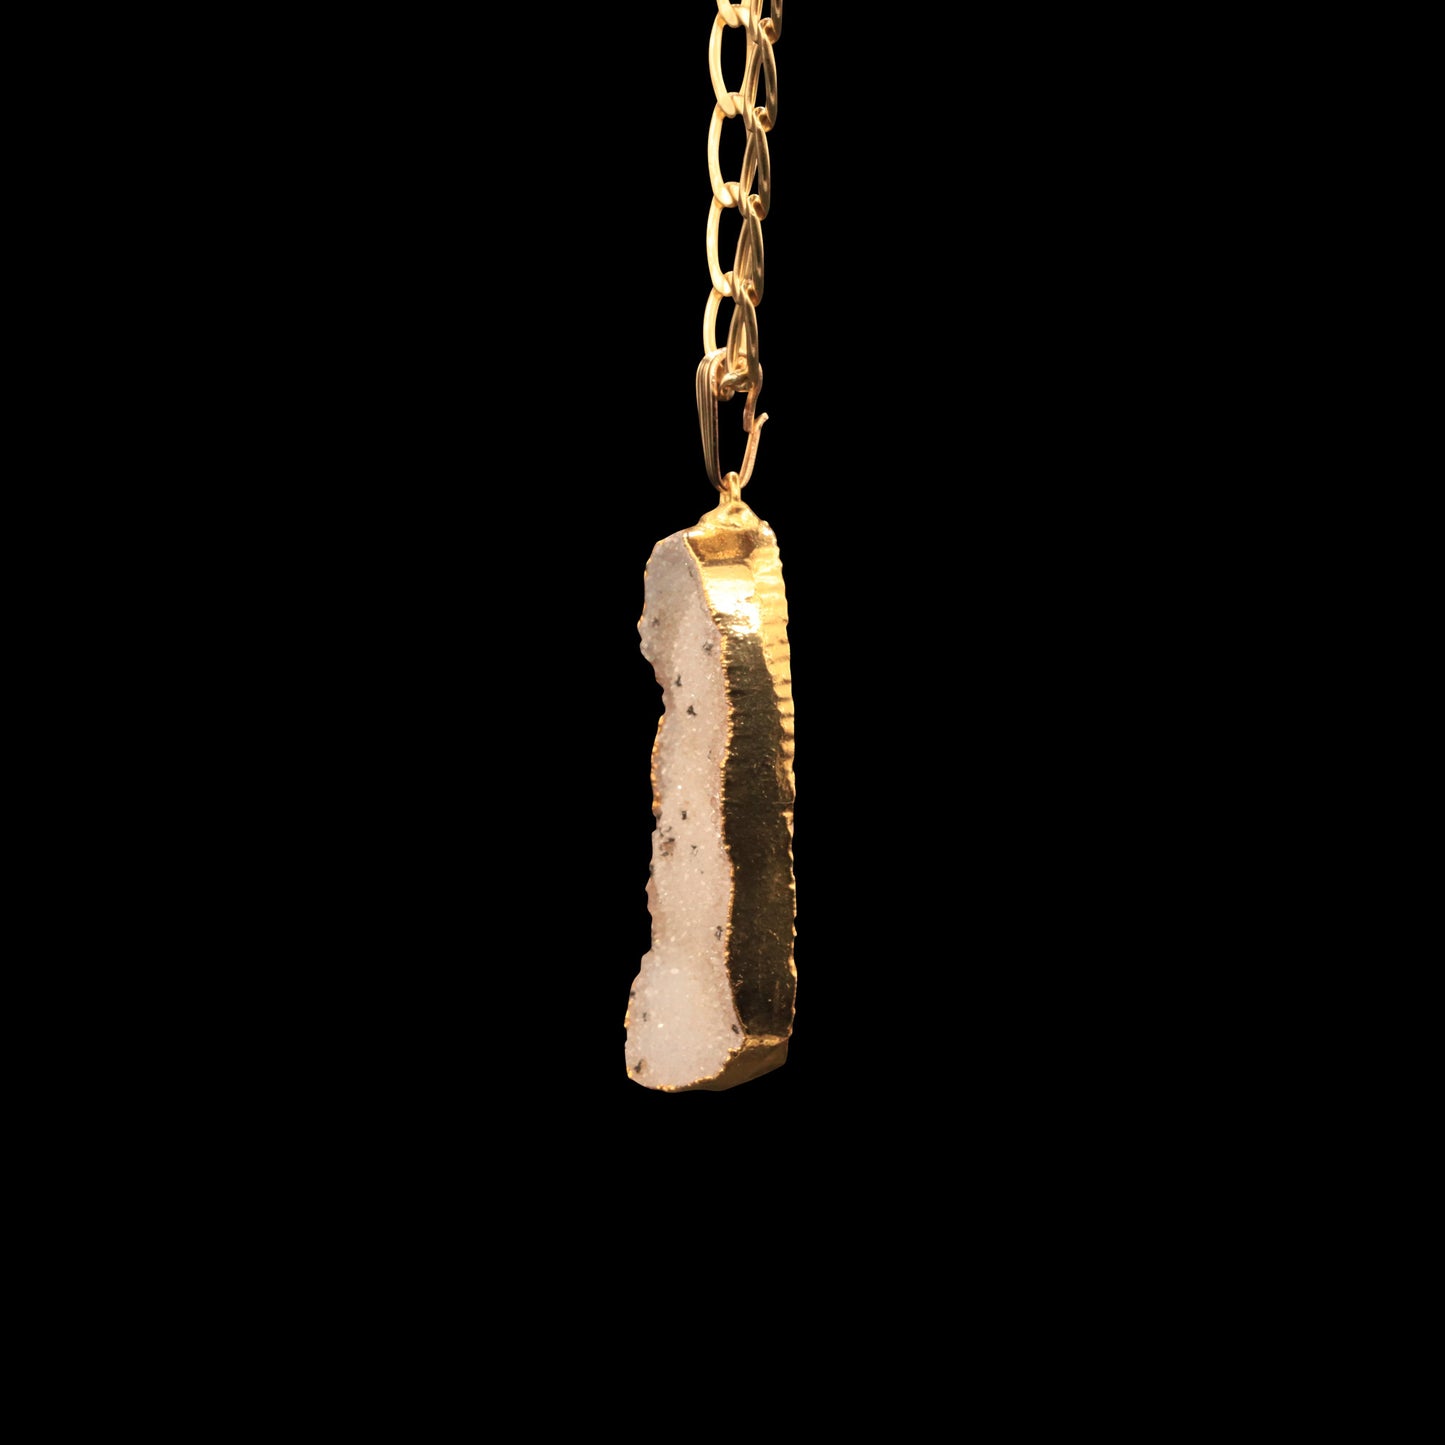 White Agate Druzy on Elongated Curb